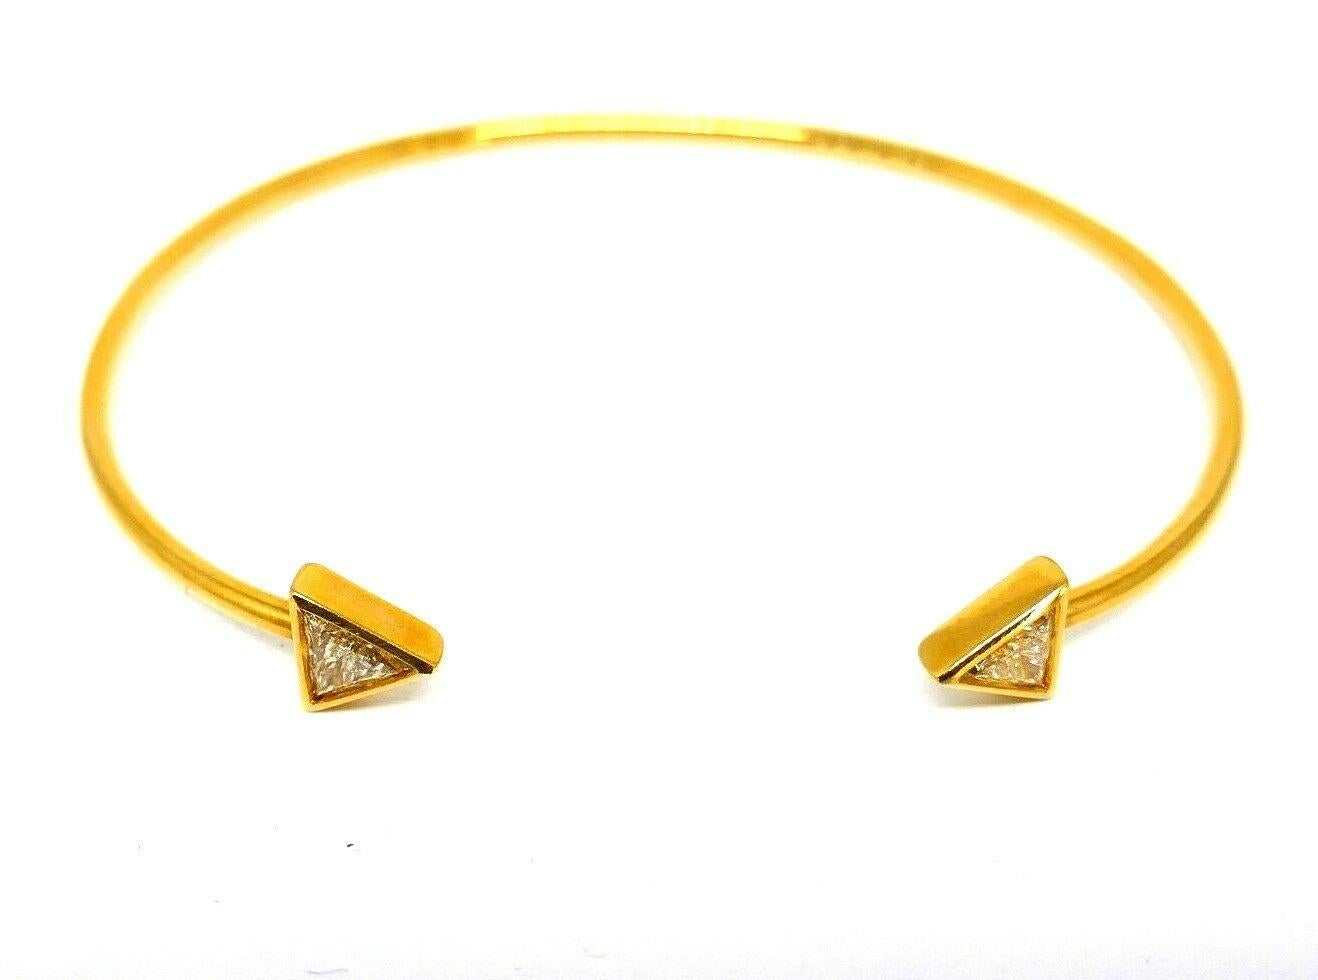 Delicate wire bracelet made of 18k yellow gold, signed by Jennifer Meyer. Narrow ends accentuated with trillion cut diamonds.  Carat weight is about 0.40 points each. 
Stamped with Jennifer Mayer maker's mark and a hallmark for 18k